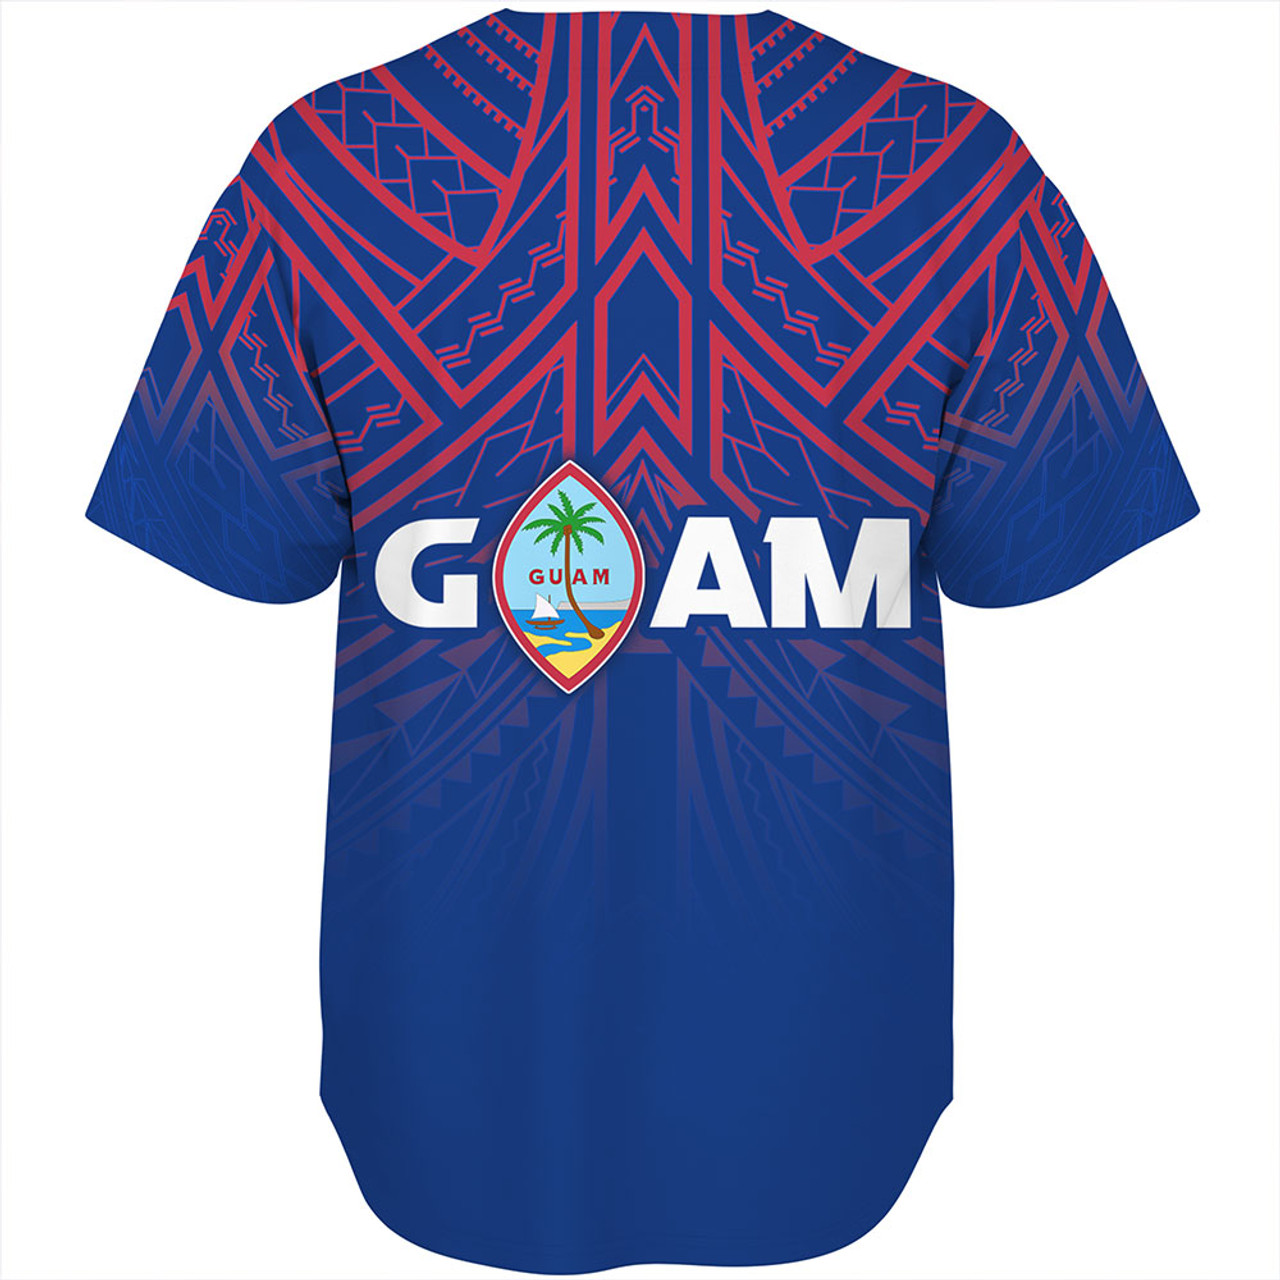 Guam Baseball Shirt - Flag Color With Traditional Patterns